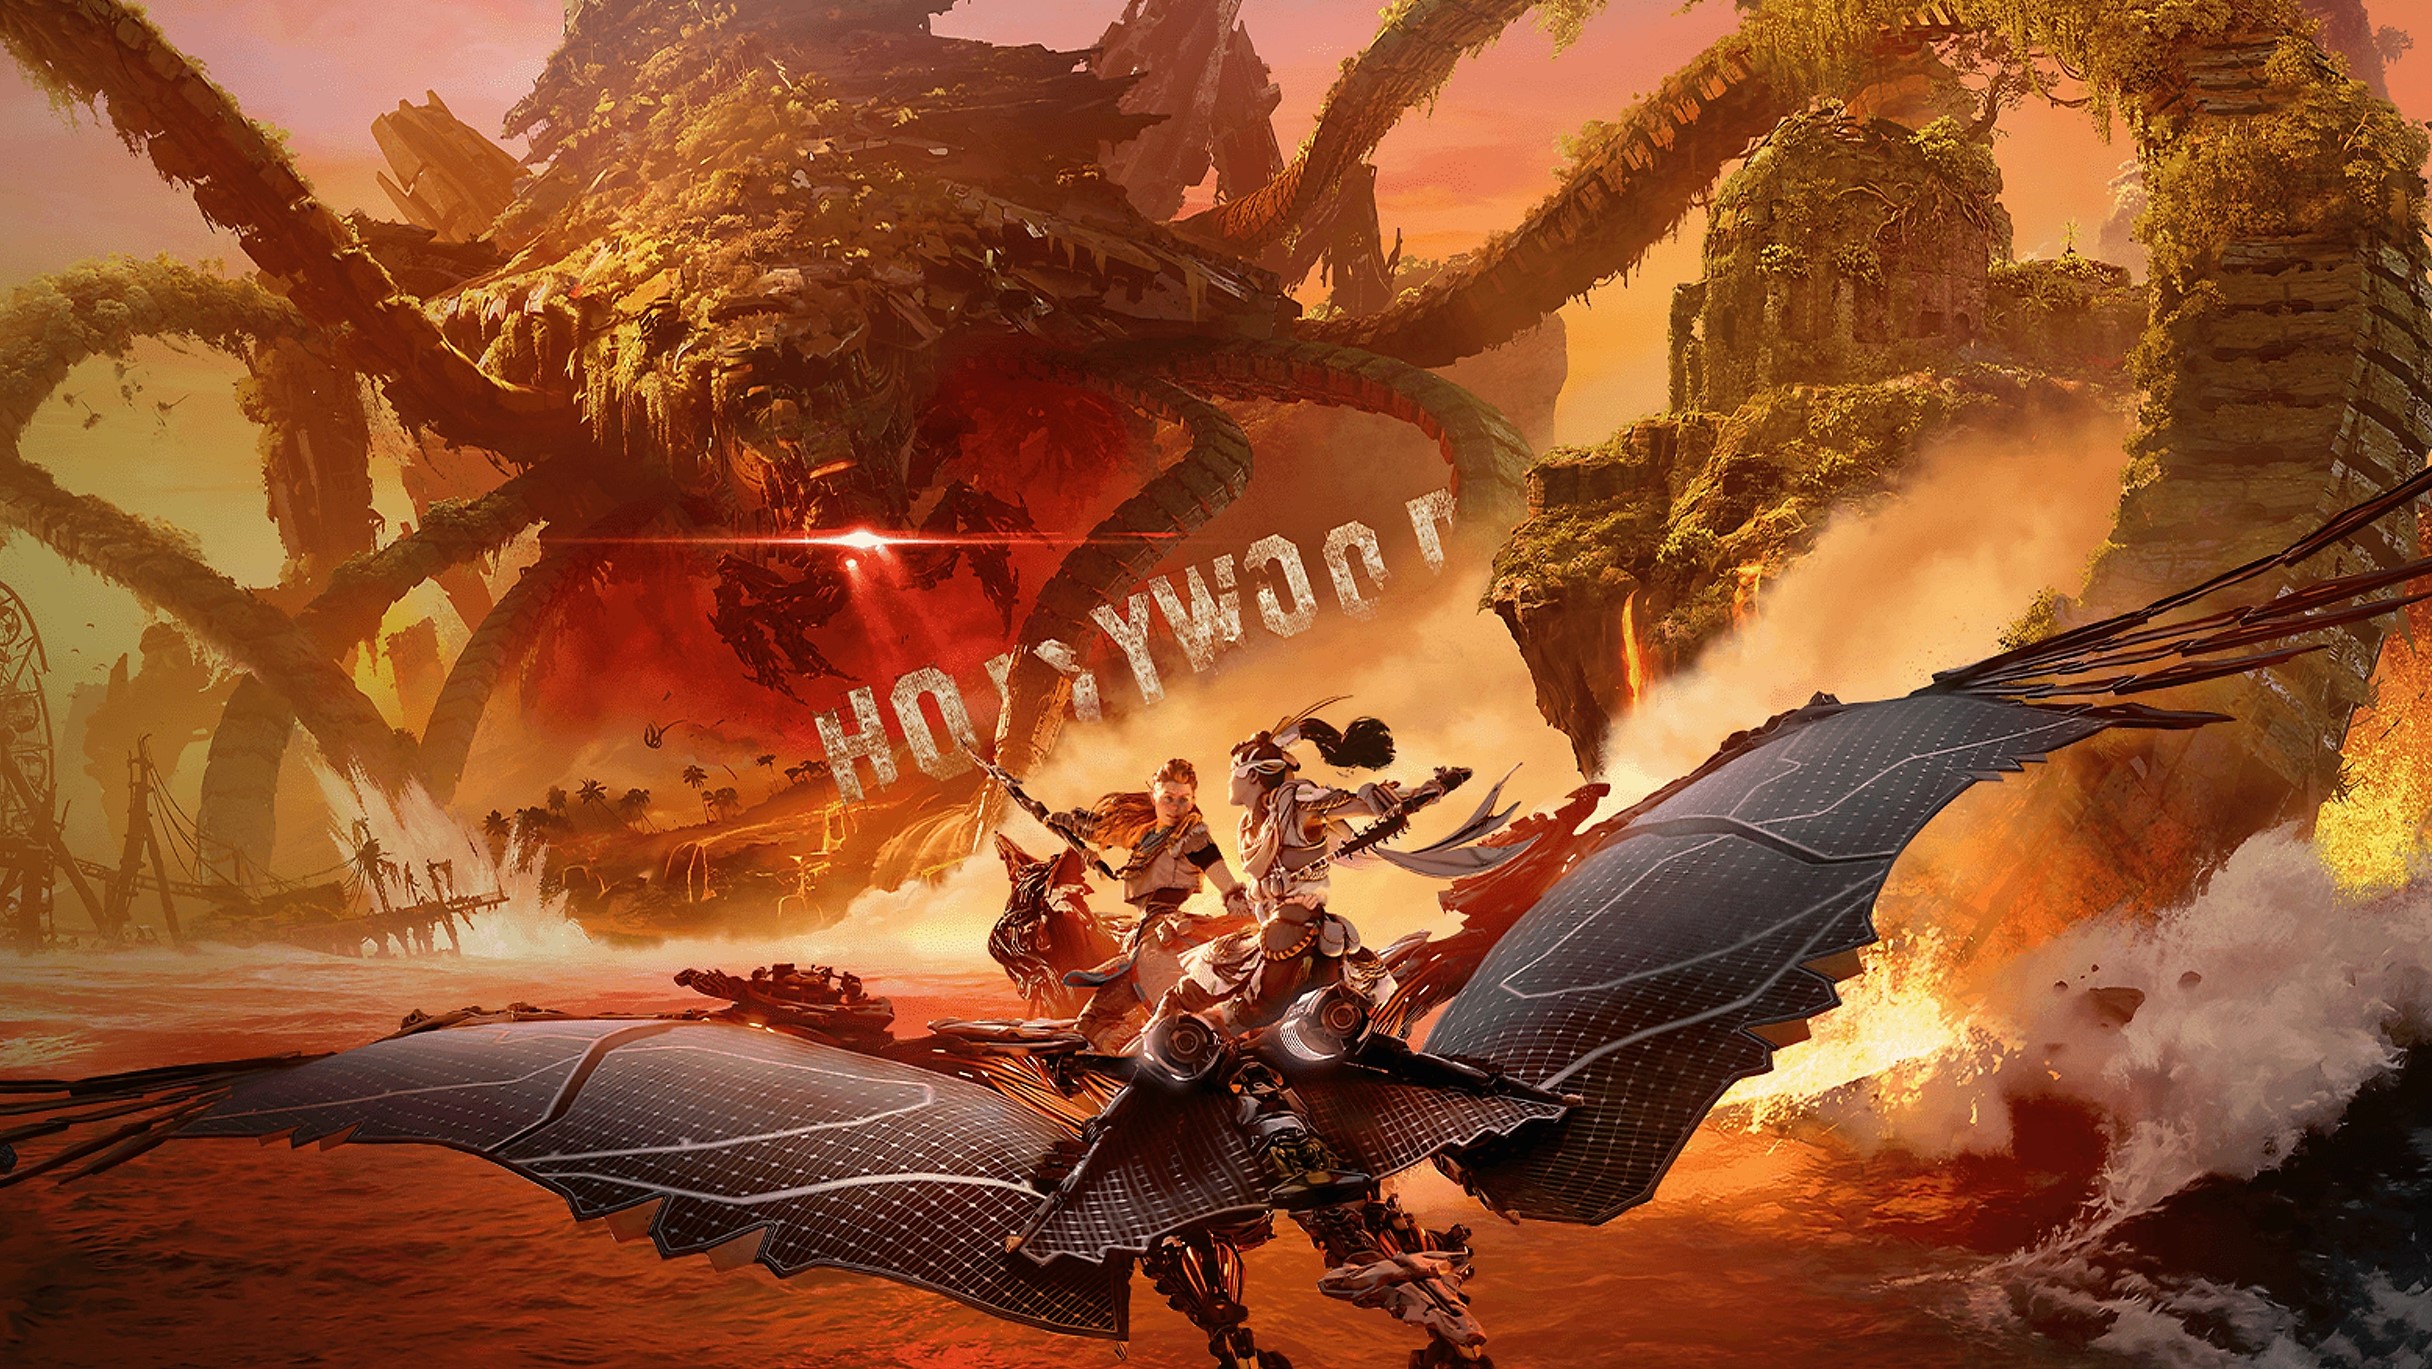 Horizon Forbidden West heroine Aloy and her new companion Seyka ride on the back of a Sunwing together in a promotional image for the Burning Shores DLC